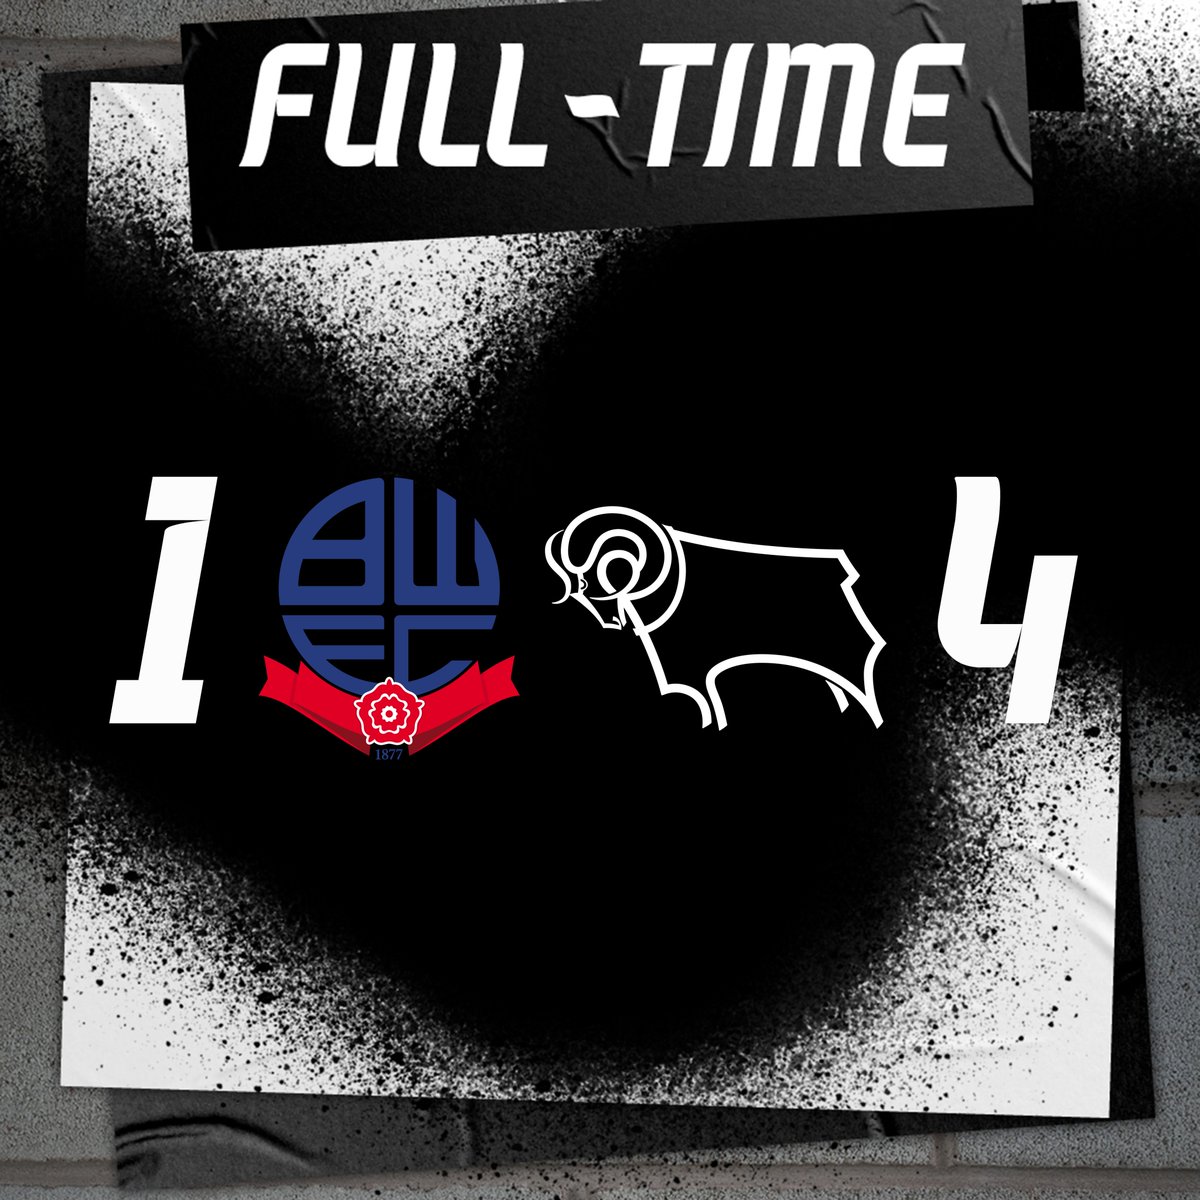 Goals from Harry Hawkins, Lennon Wheeldon, Dajaune Brown and Owen Eames see us progress to face Manchester United Under-18s in Round Three of the FA Youth Cup! 👊🐏 #DCFC #dcfcfans